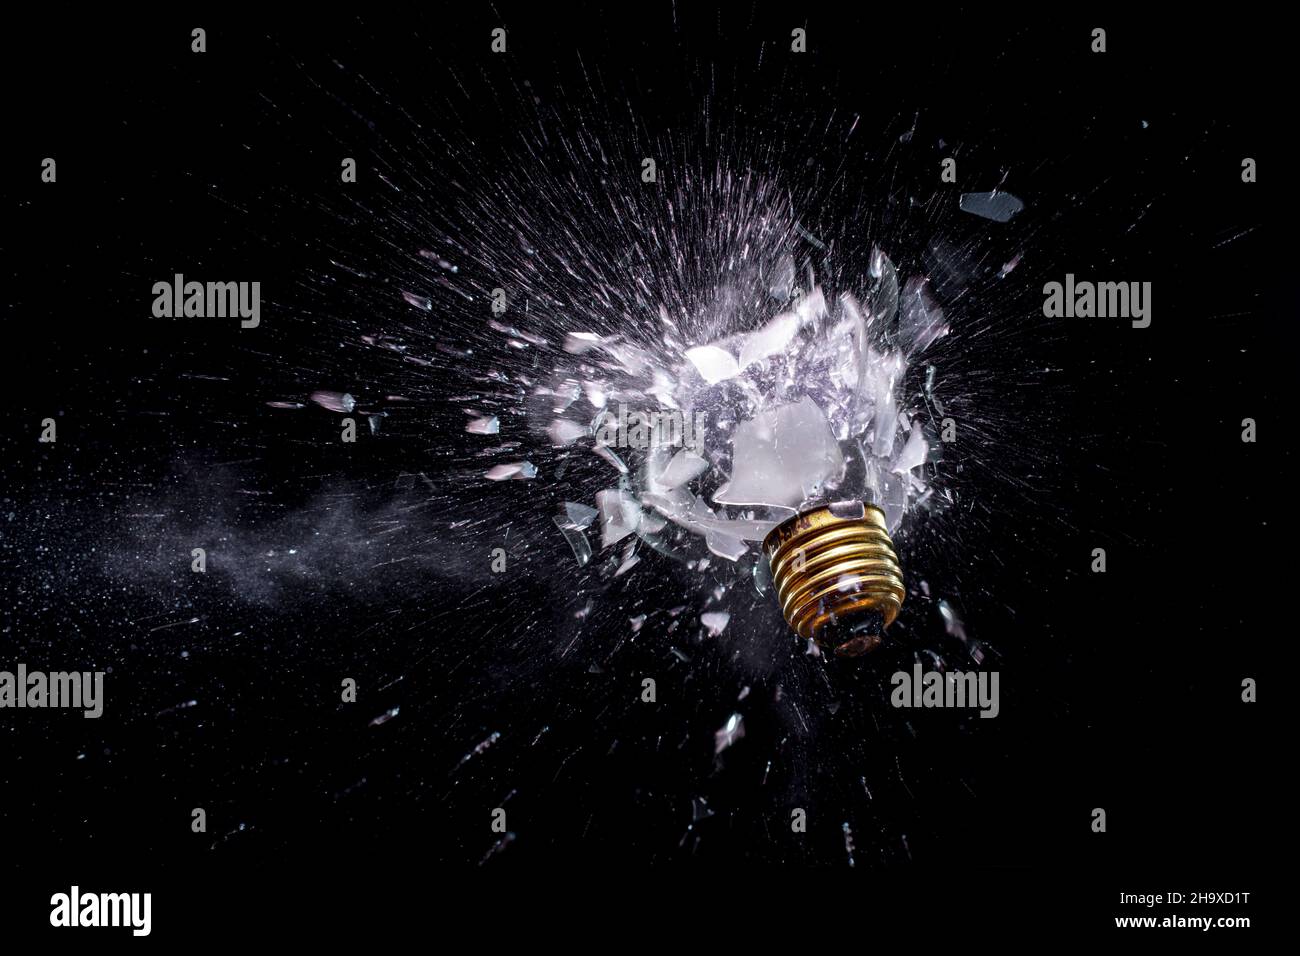 glass that shatters after an impact. Stock Photo